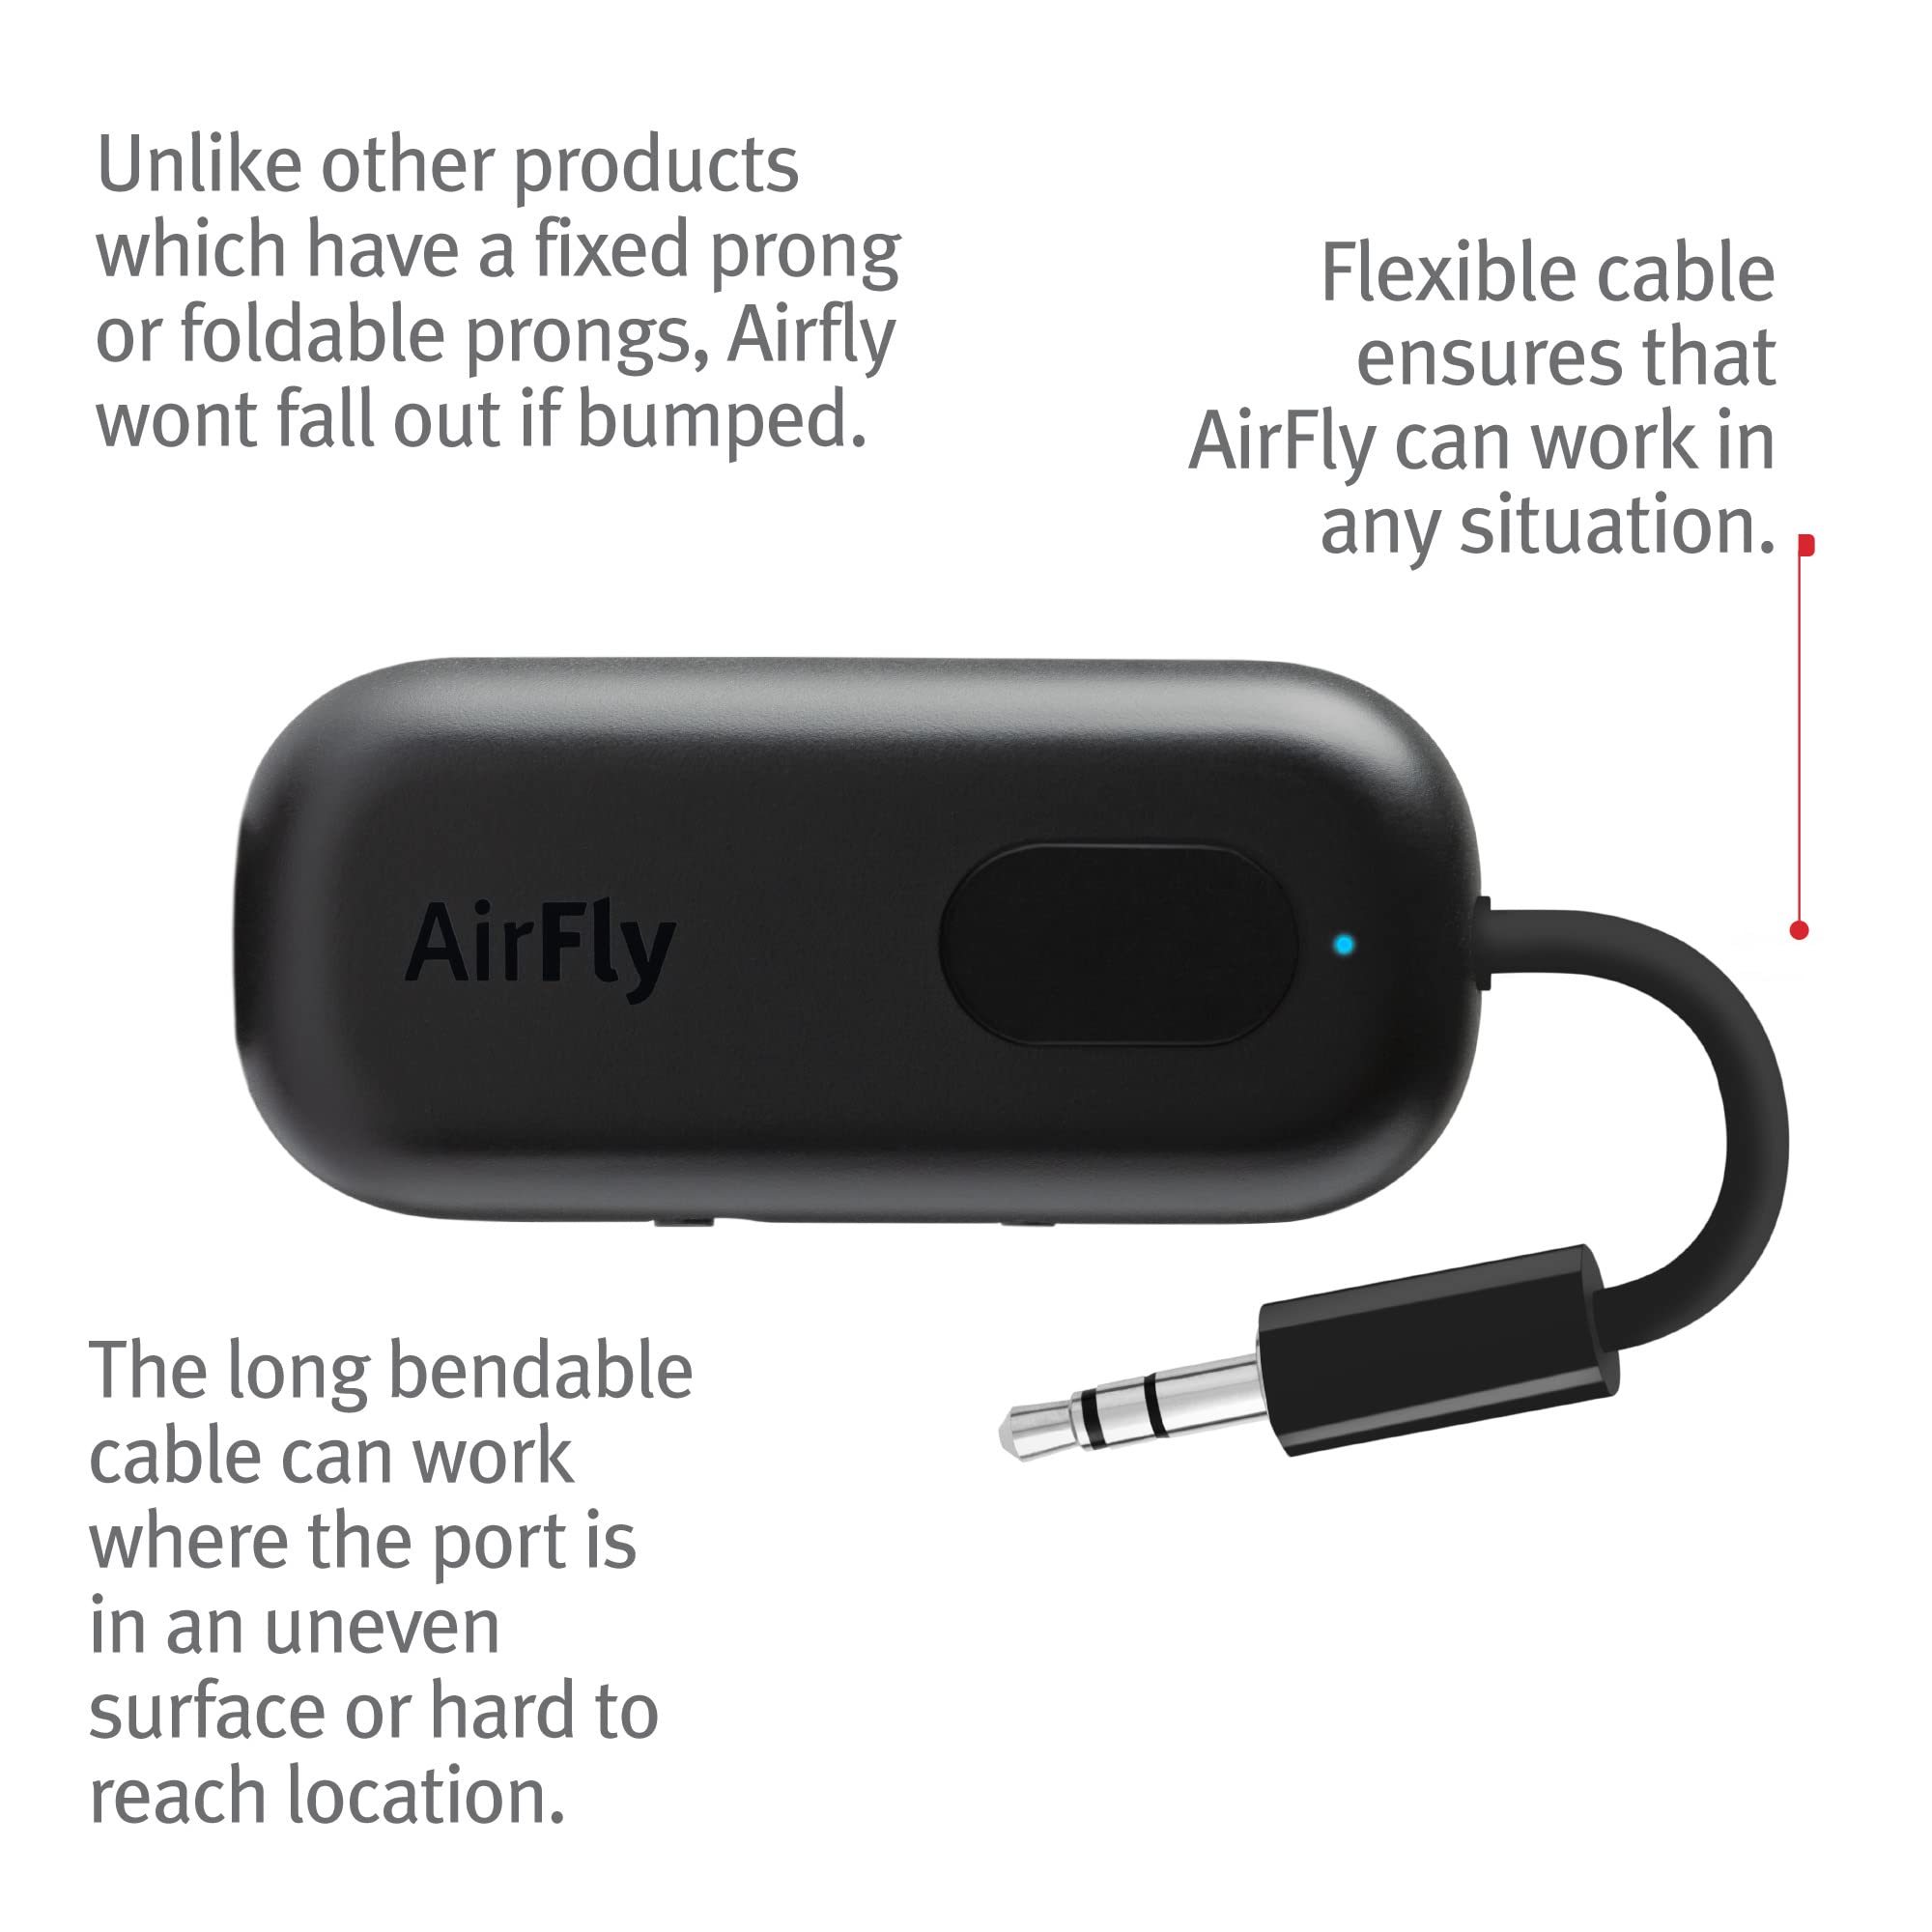 Twelve South AirFly Pro Bluetooth Wireless Audio Transmitter/Receiver for up to 2 AirPods/Wireless Headphones; Use with Any 3.5 mm Audio Jack, Black